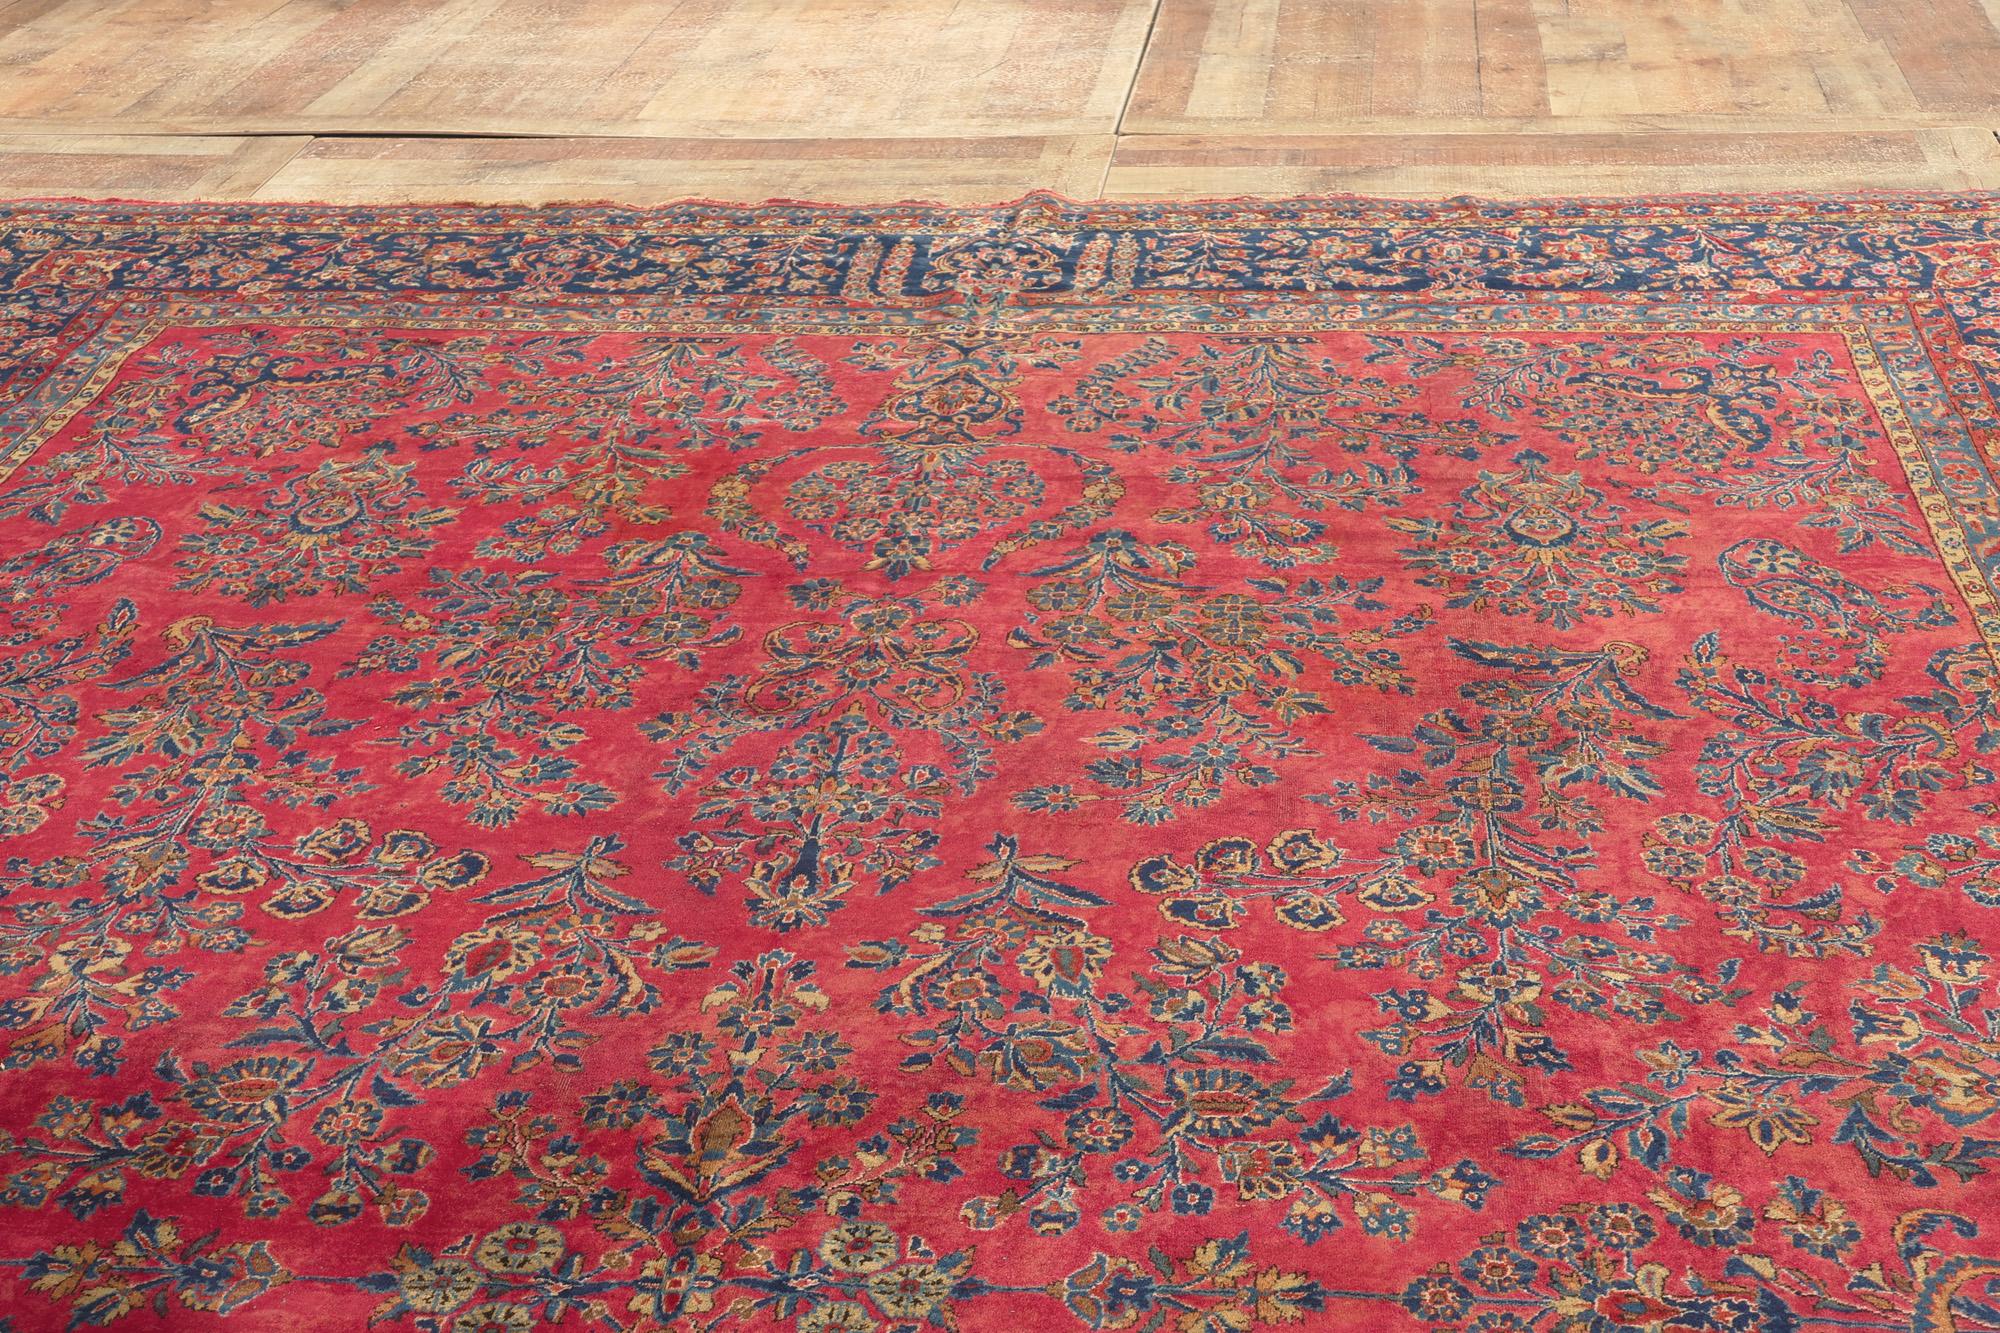 Antique Persian Kashan Rug with Art Nouveau Style in Rich Jewel Tones 7